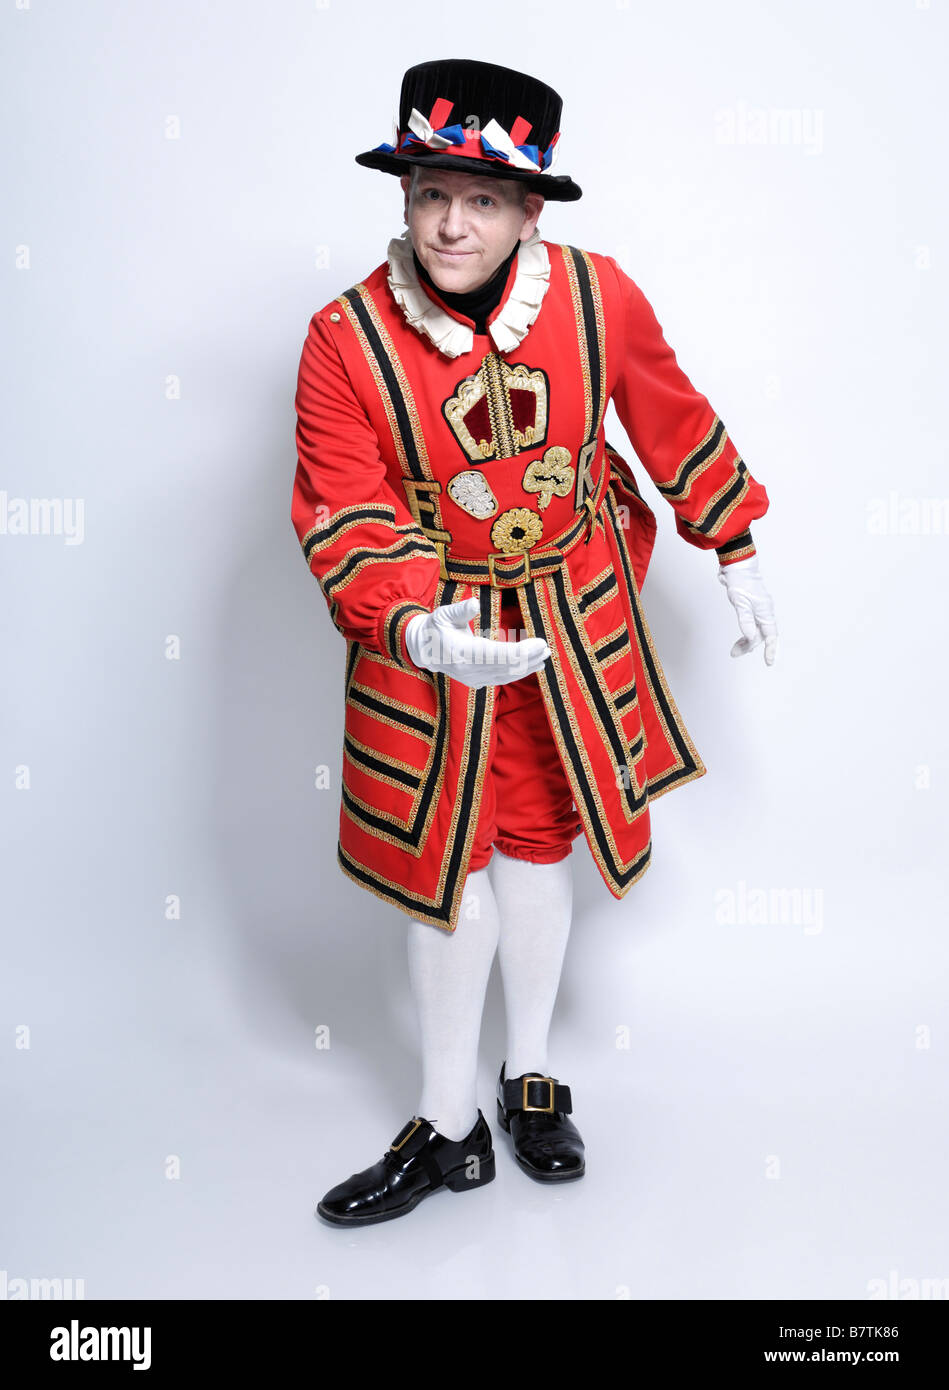 Beefeater bowing in welcoming gesture Stock Photo